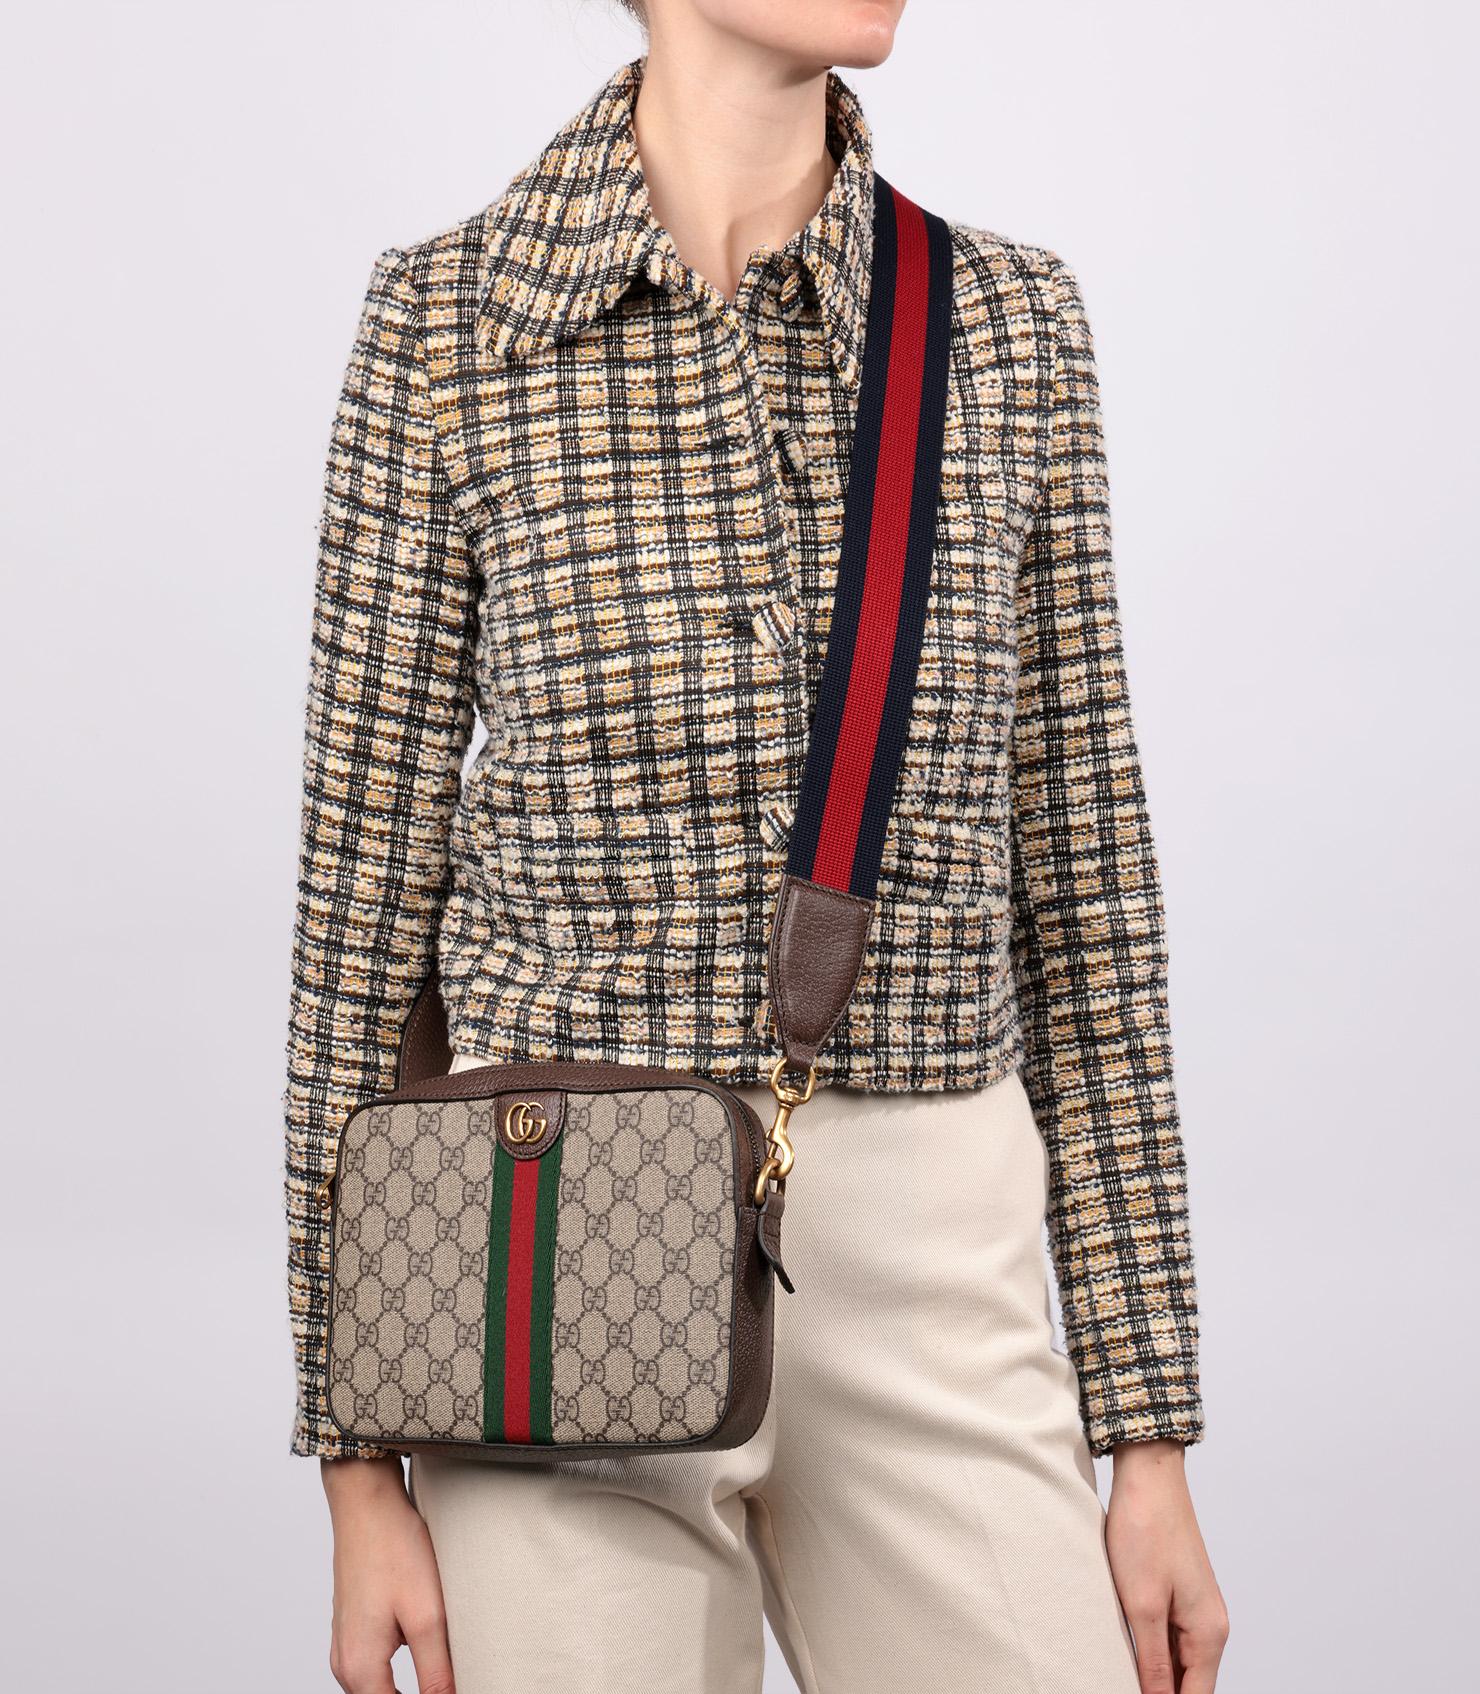 Gucci Beige GG Supreme Canvas, Brown Leather, Green & Red Web Ophodia GG Shoulder Bag

Brand- Gucci
Model- Ophidia GG Shoulder Bag
Product Type- Crossbody, Shoulder
Serial Number- 69********
Age- Circa 2020
Accompanied By- Gucci Dust Bag, Shoulder